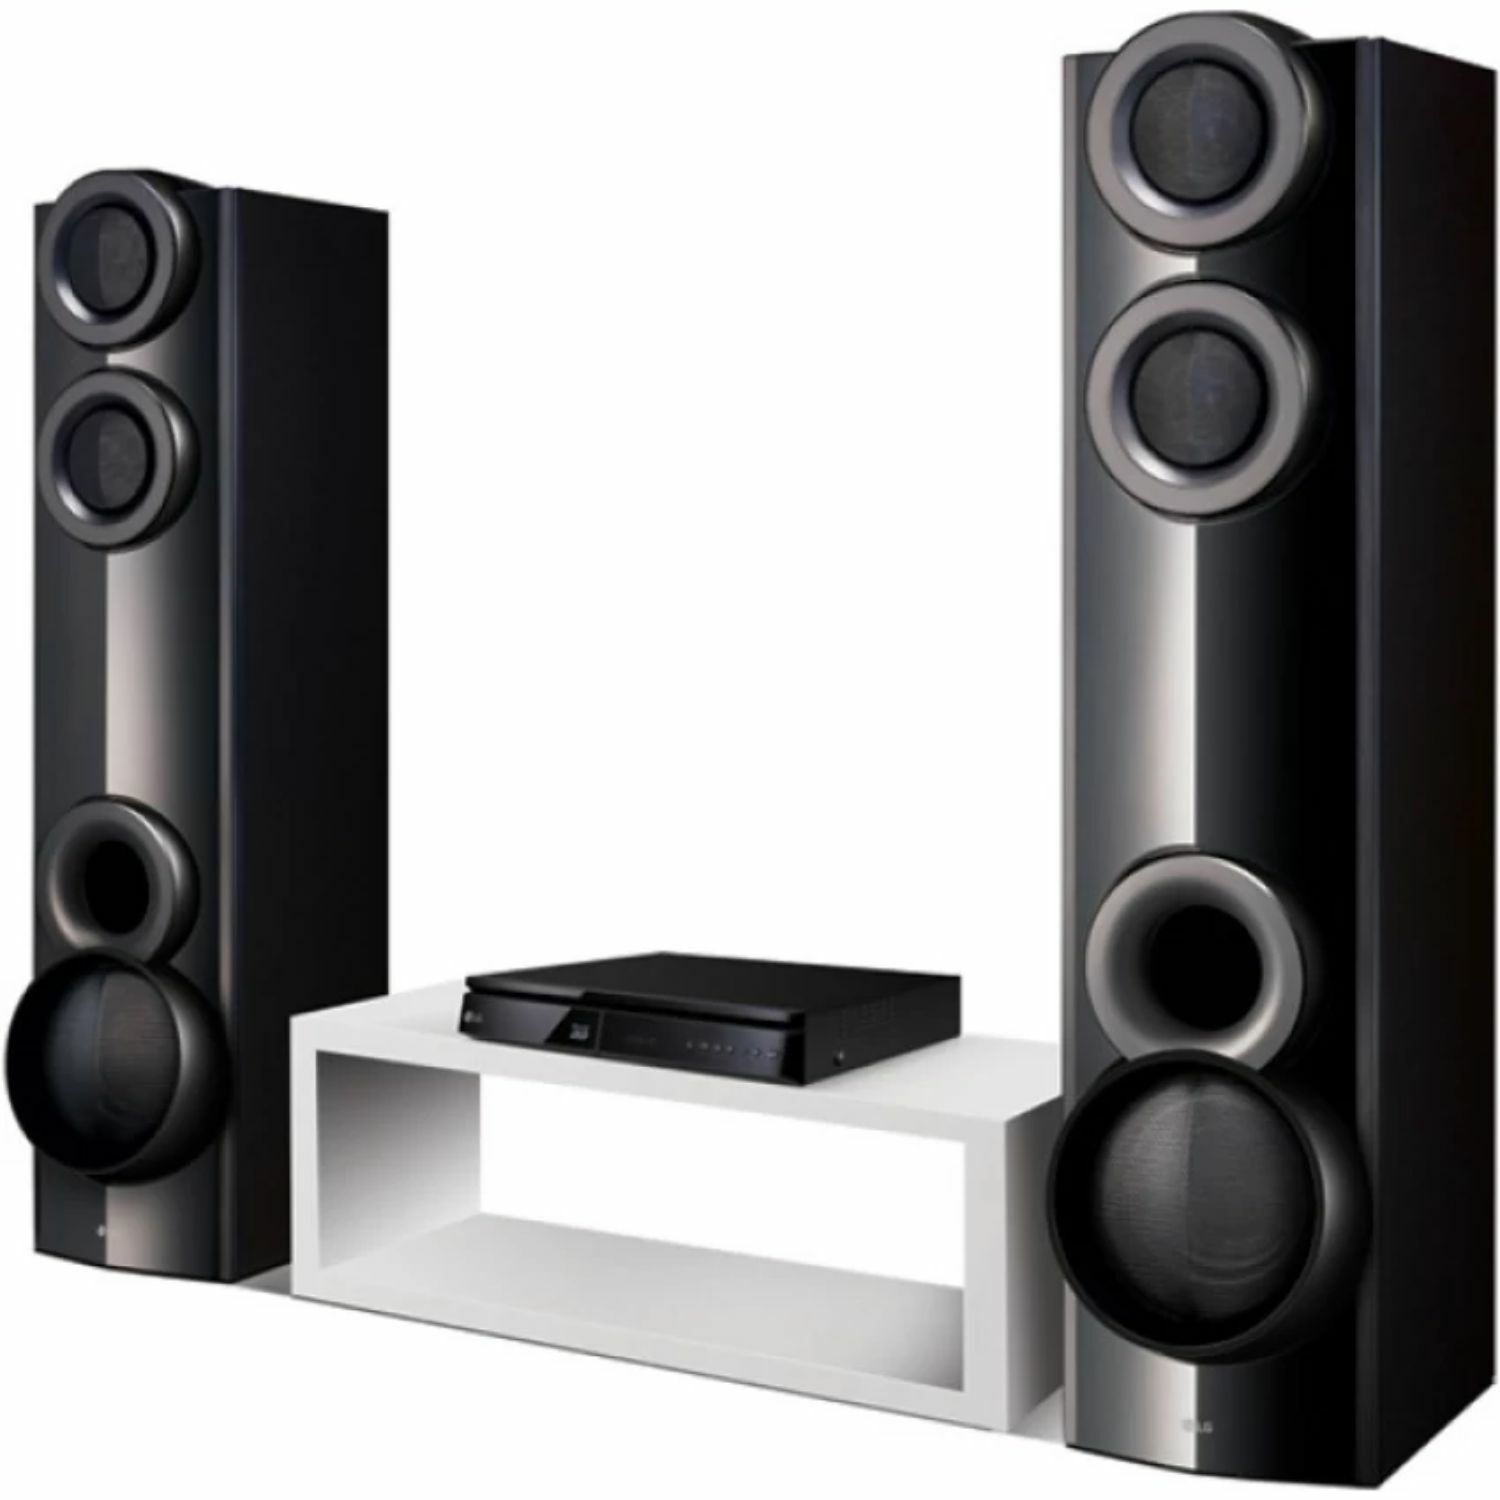 LG 3D-Capable 1000W 4.2ch Blu-ray Disc Home Theater System - Black - image 3 of 5